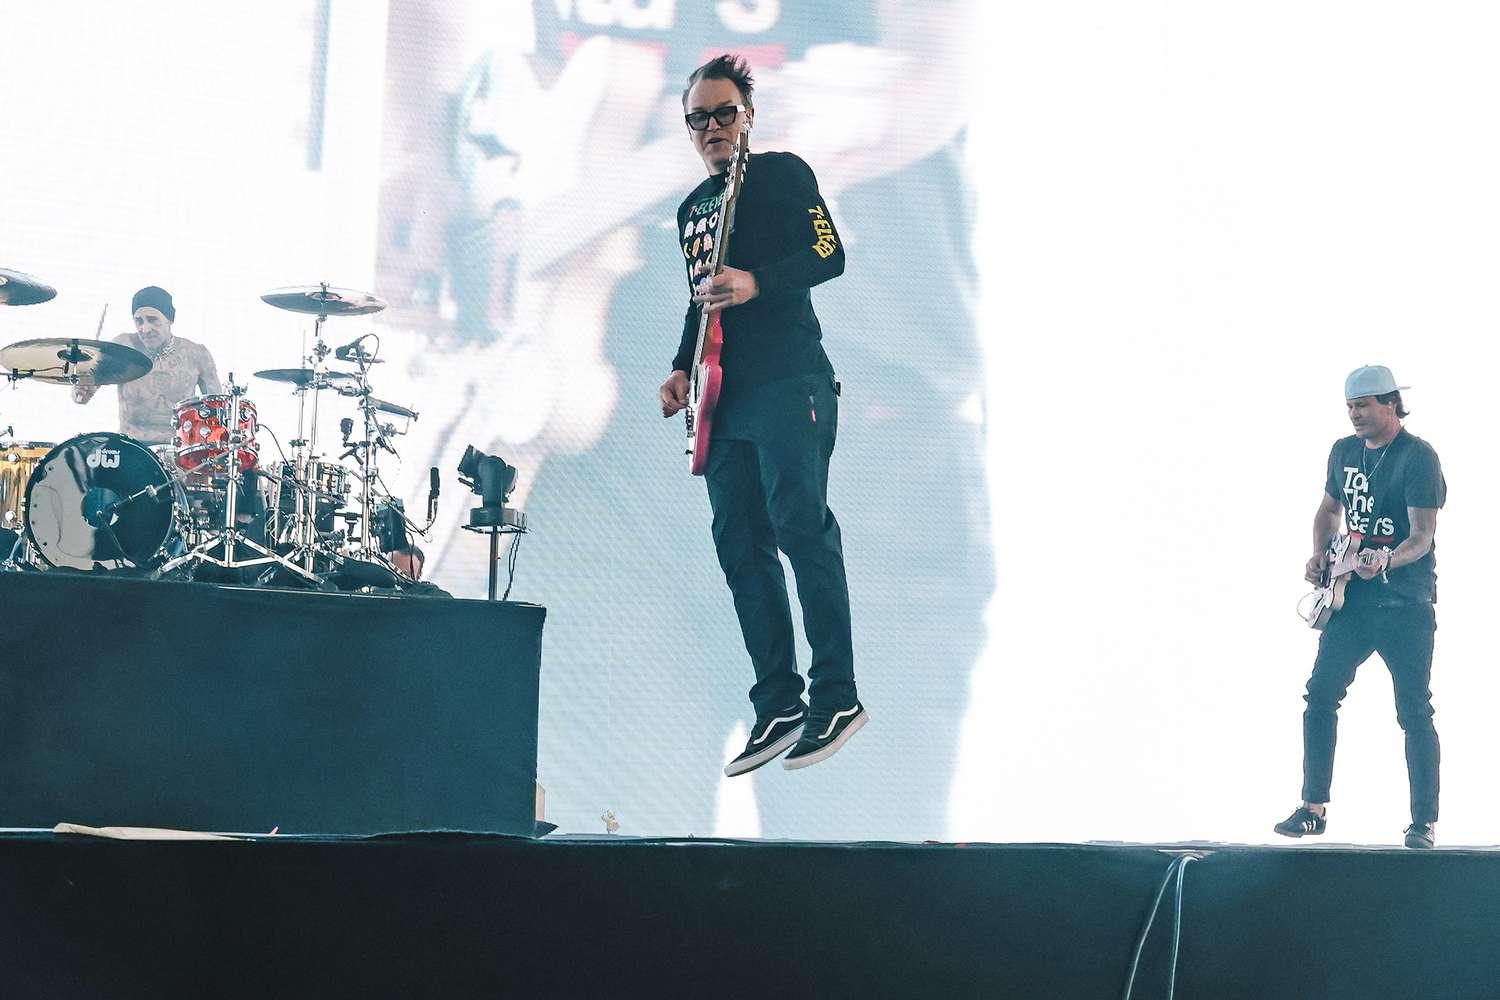 Coachella Valley, CA - April 14: Blink 182 performs at Coachella on Friday, April 14, 2023 in Coachella Valley, CA. (Dania Maxwell / Los Angeles Times via Getty Images).